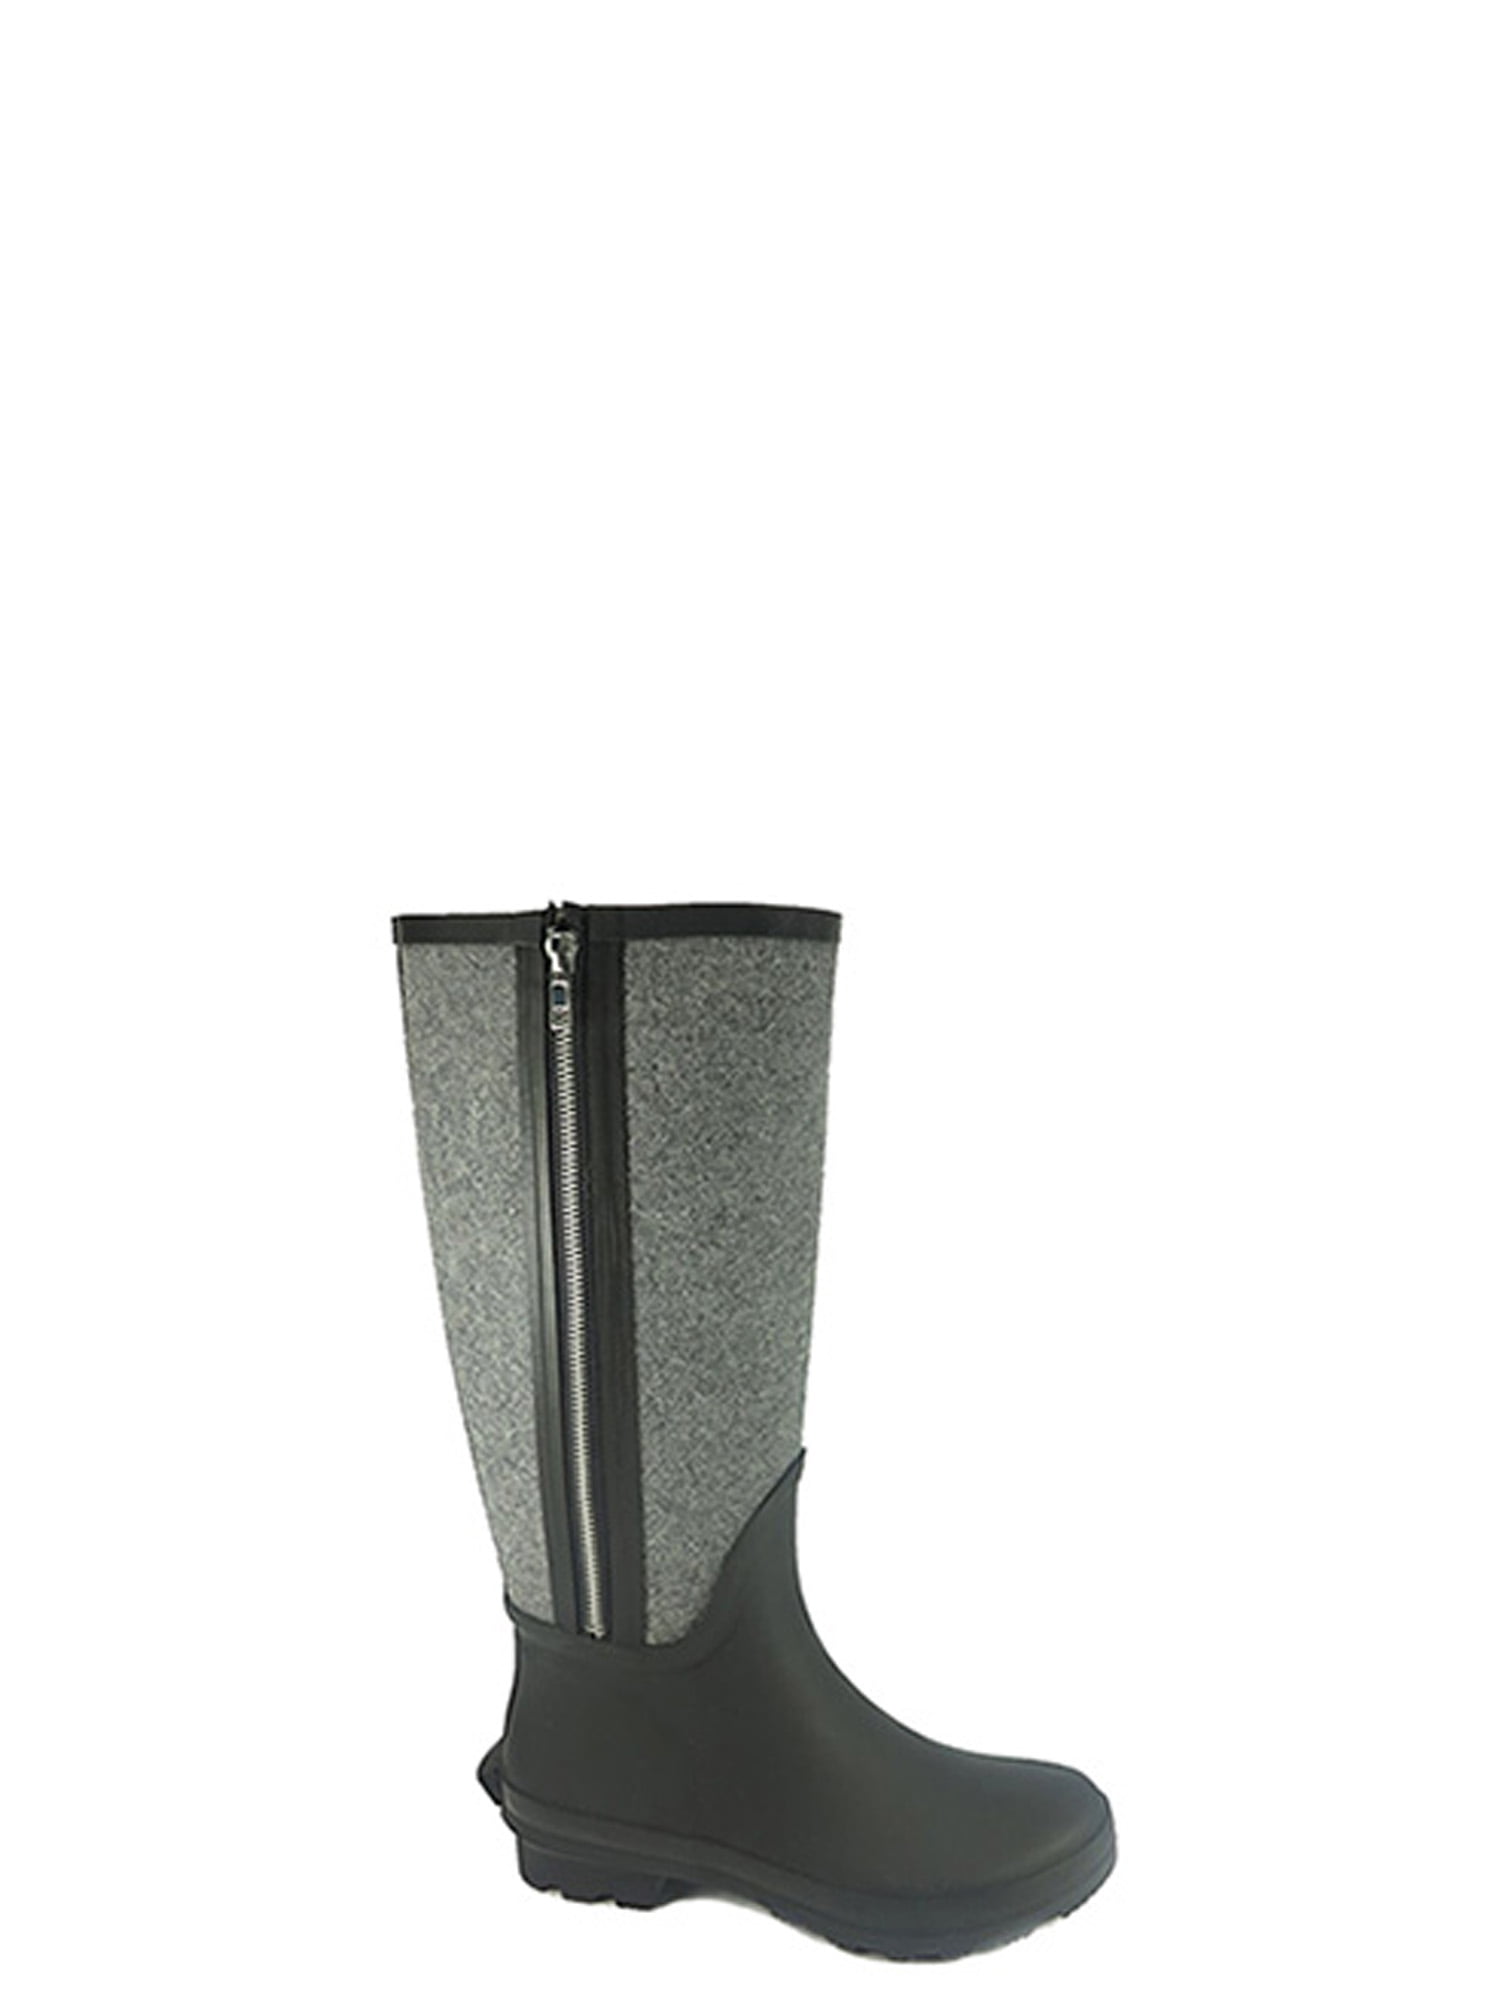 Women's Time and Tru Tall Rubber Boots 